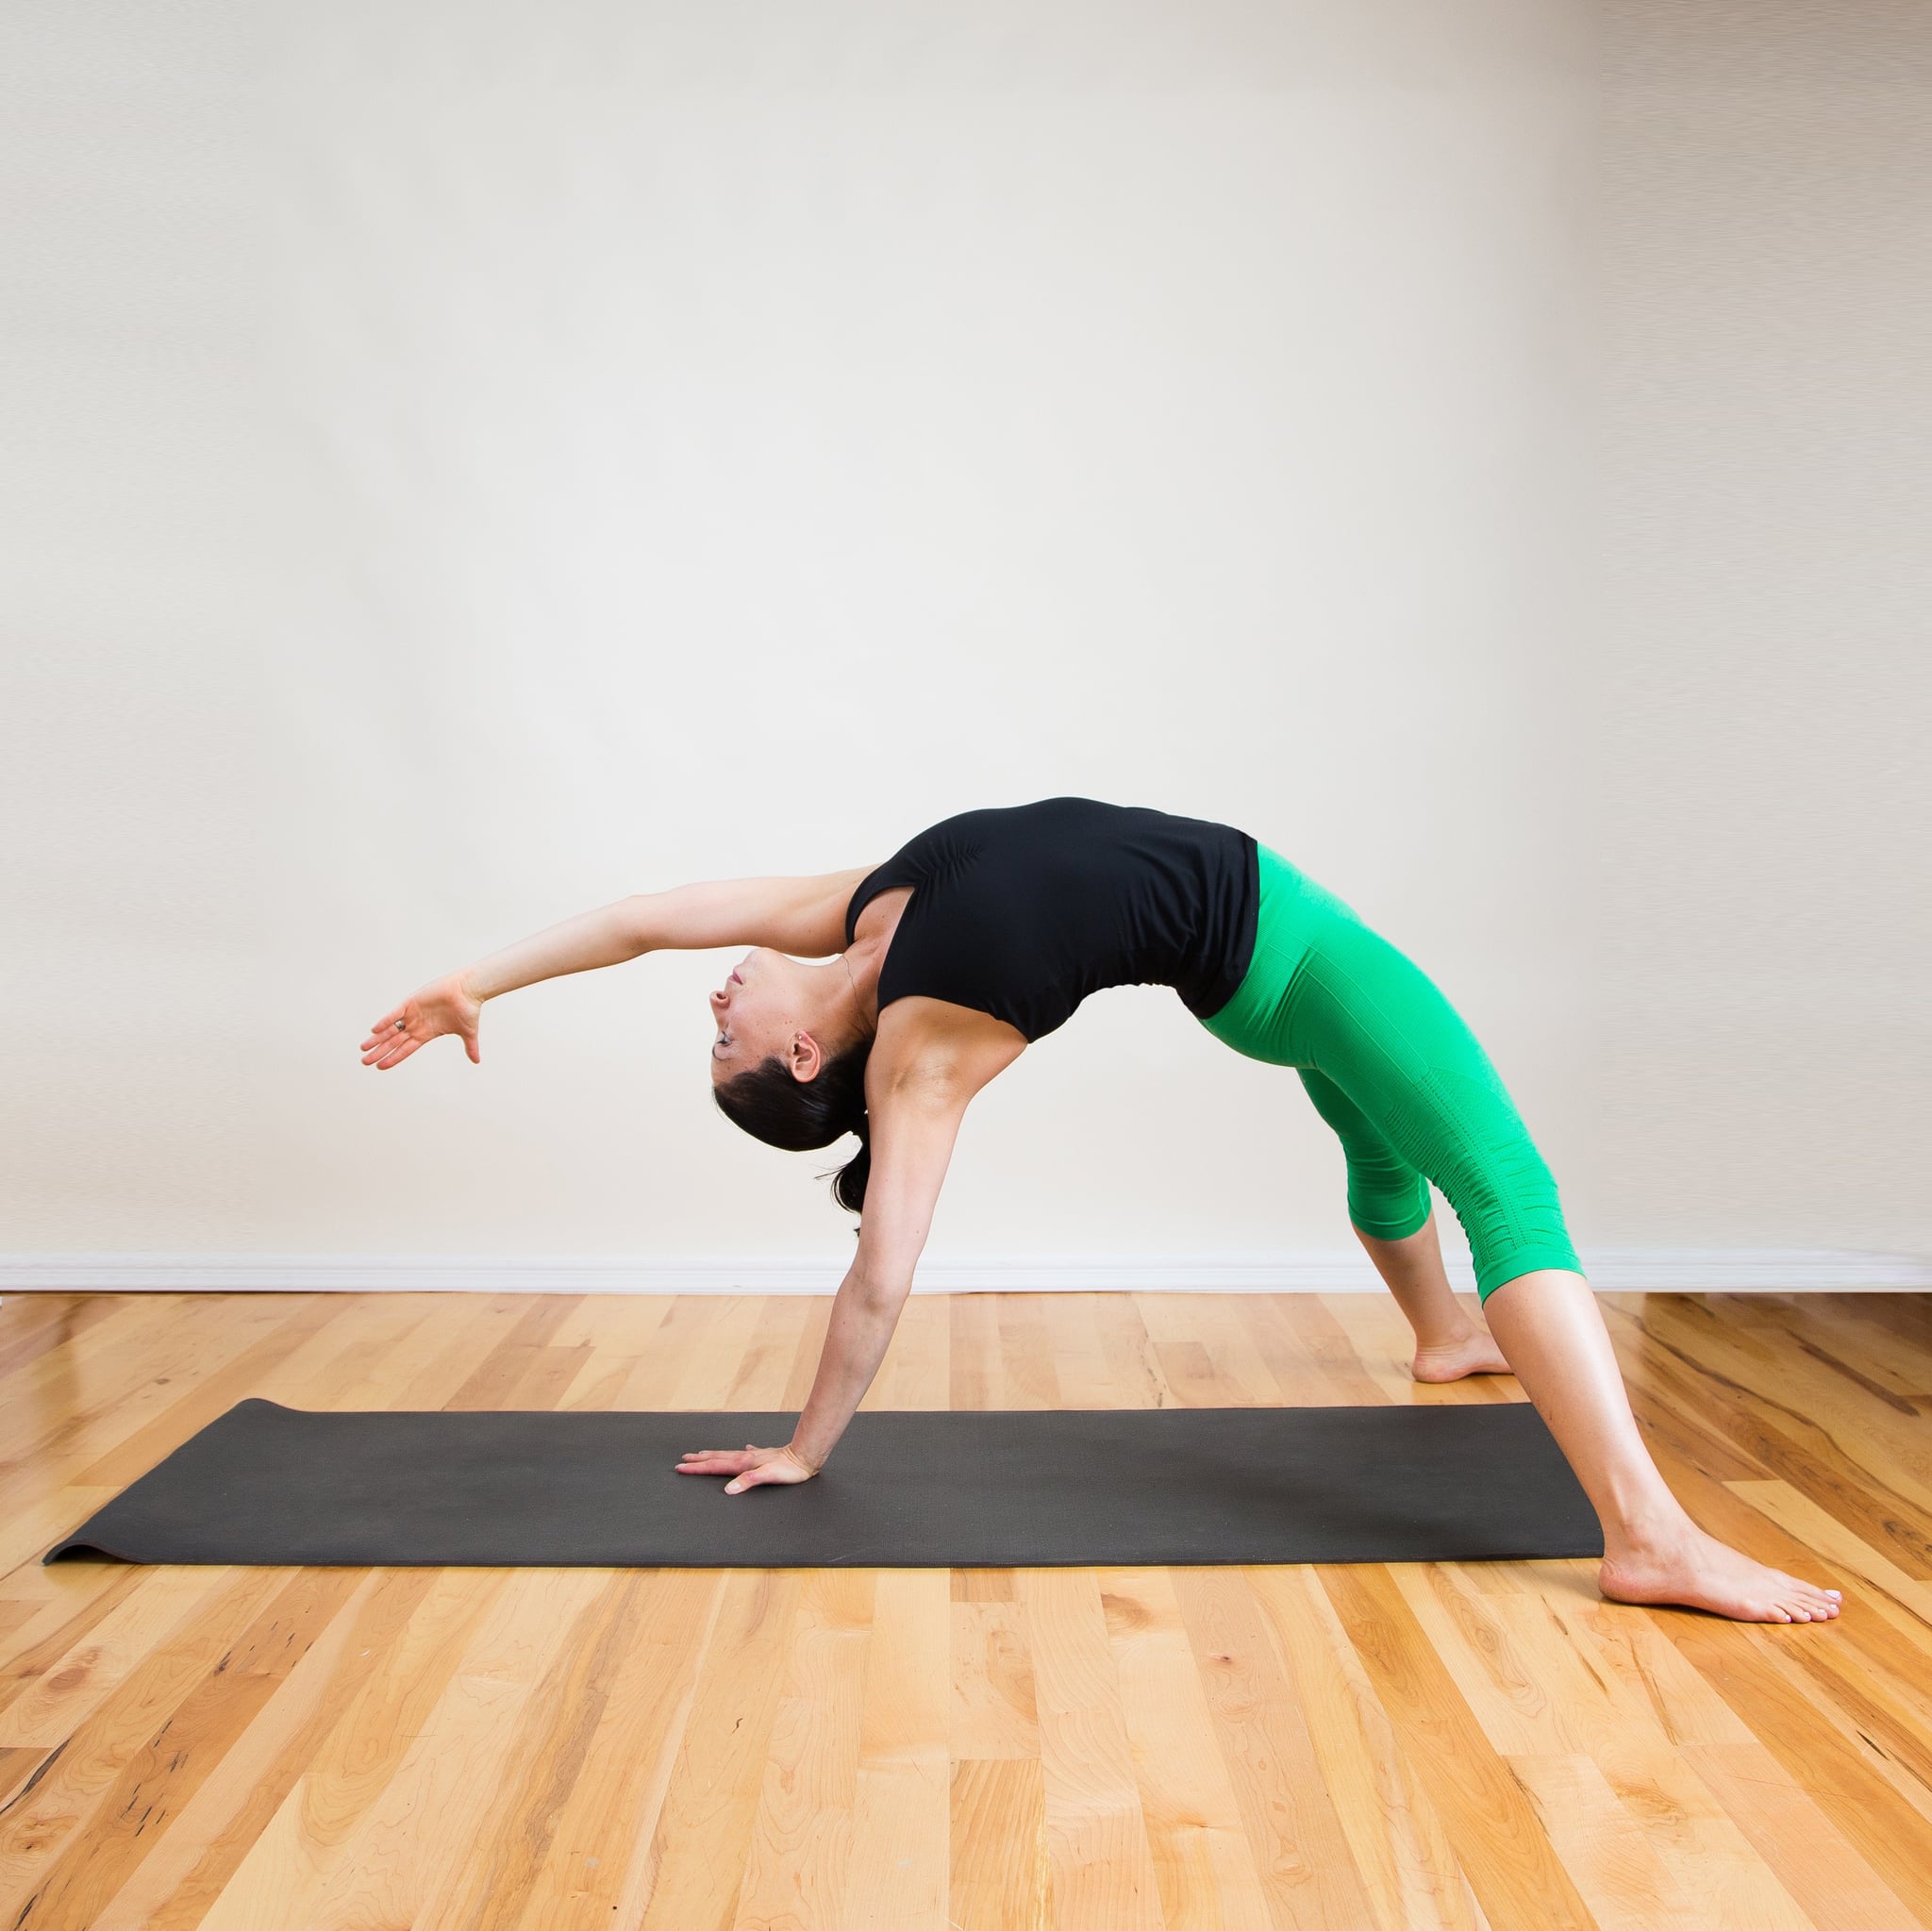 Yoga Poses For Arms And Butt Popsugar Fitness